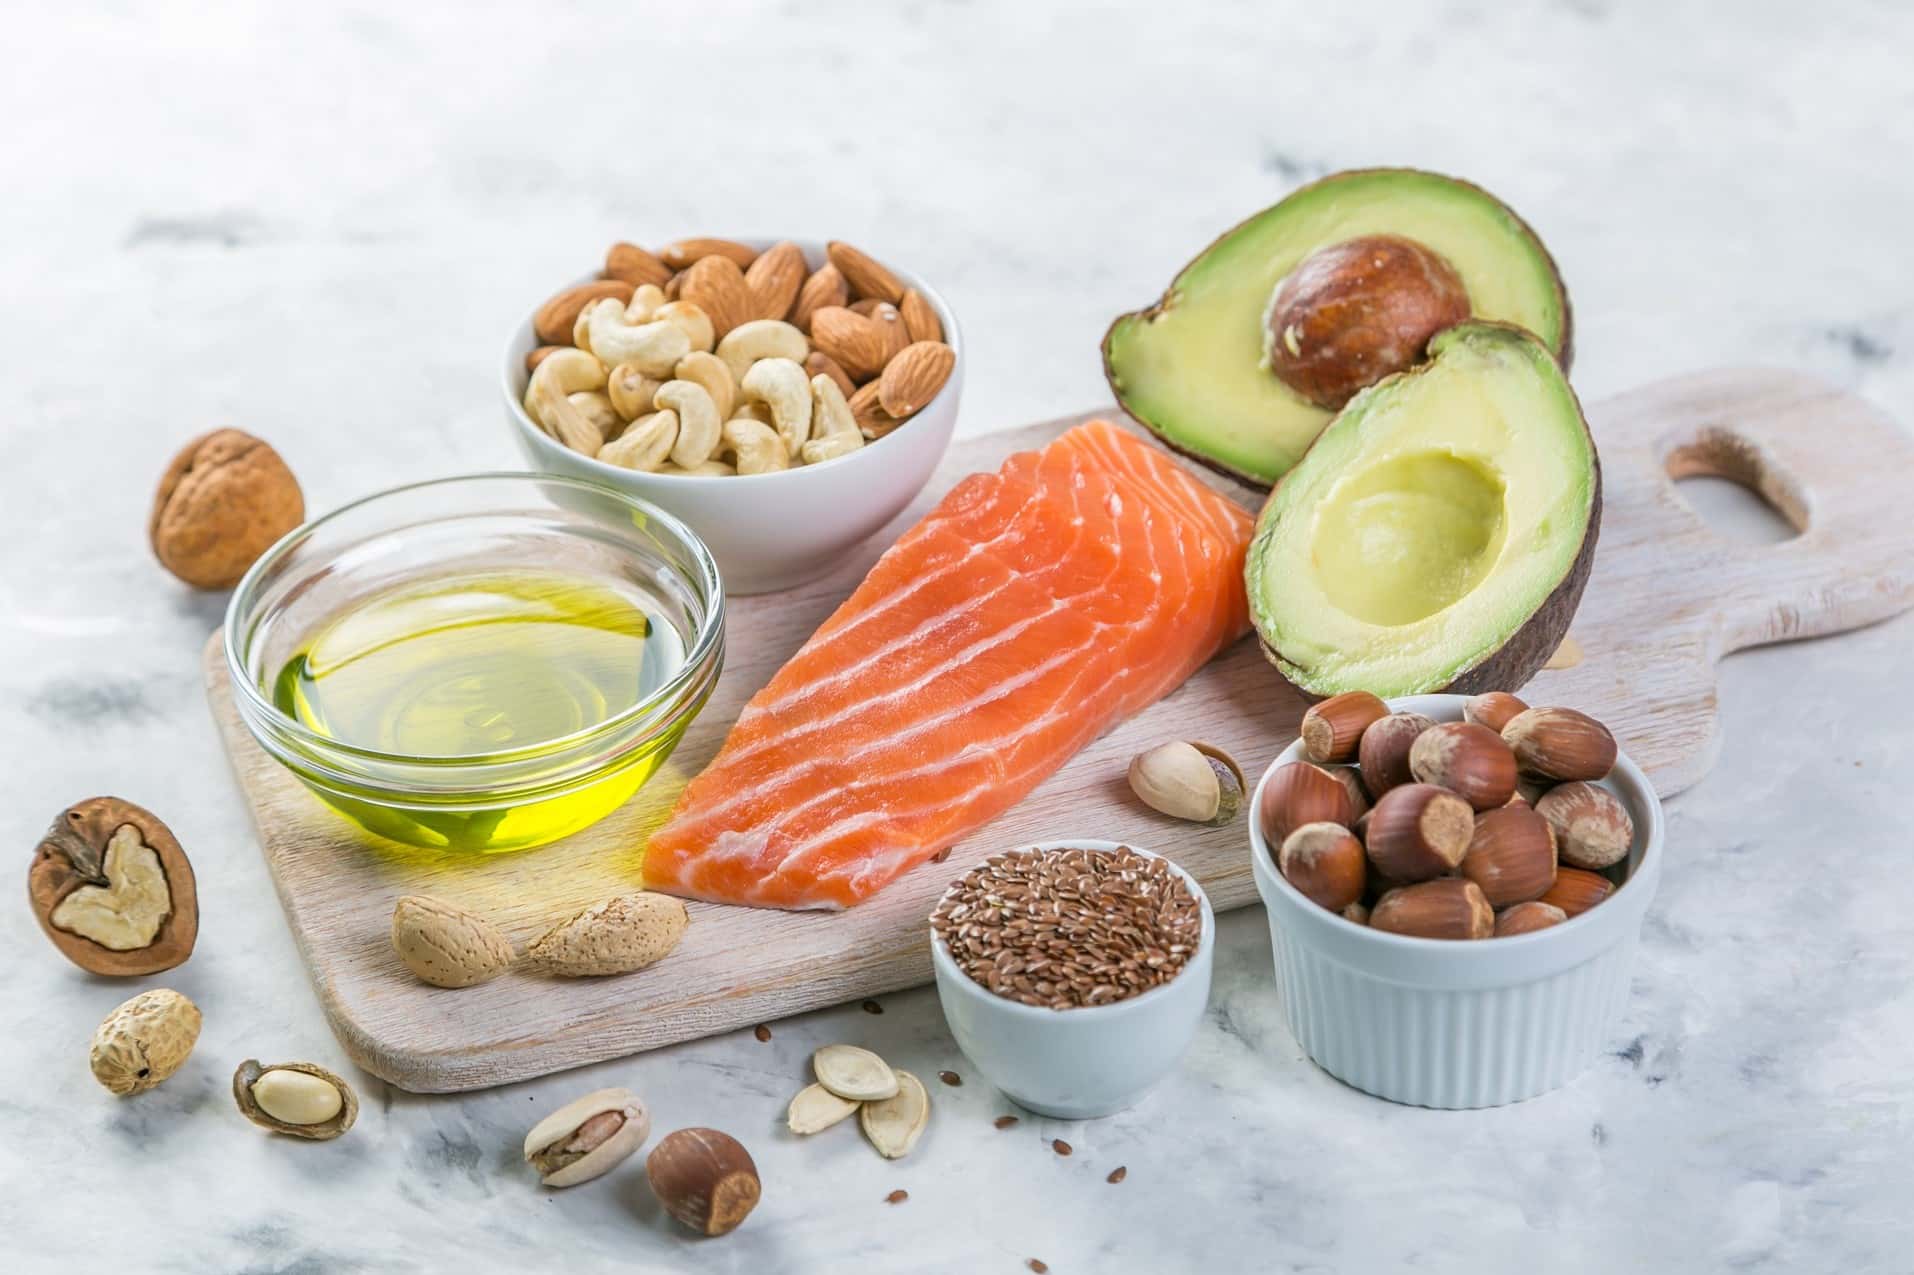 What Happens if You Don't Eat Enough Fat on Keto?